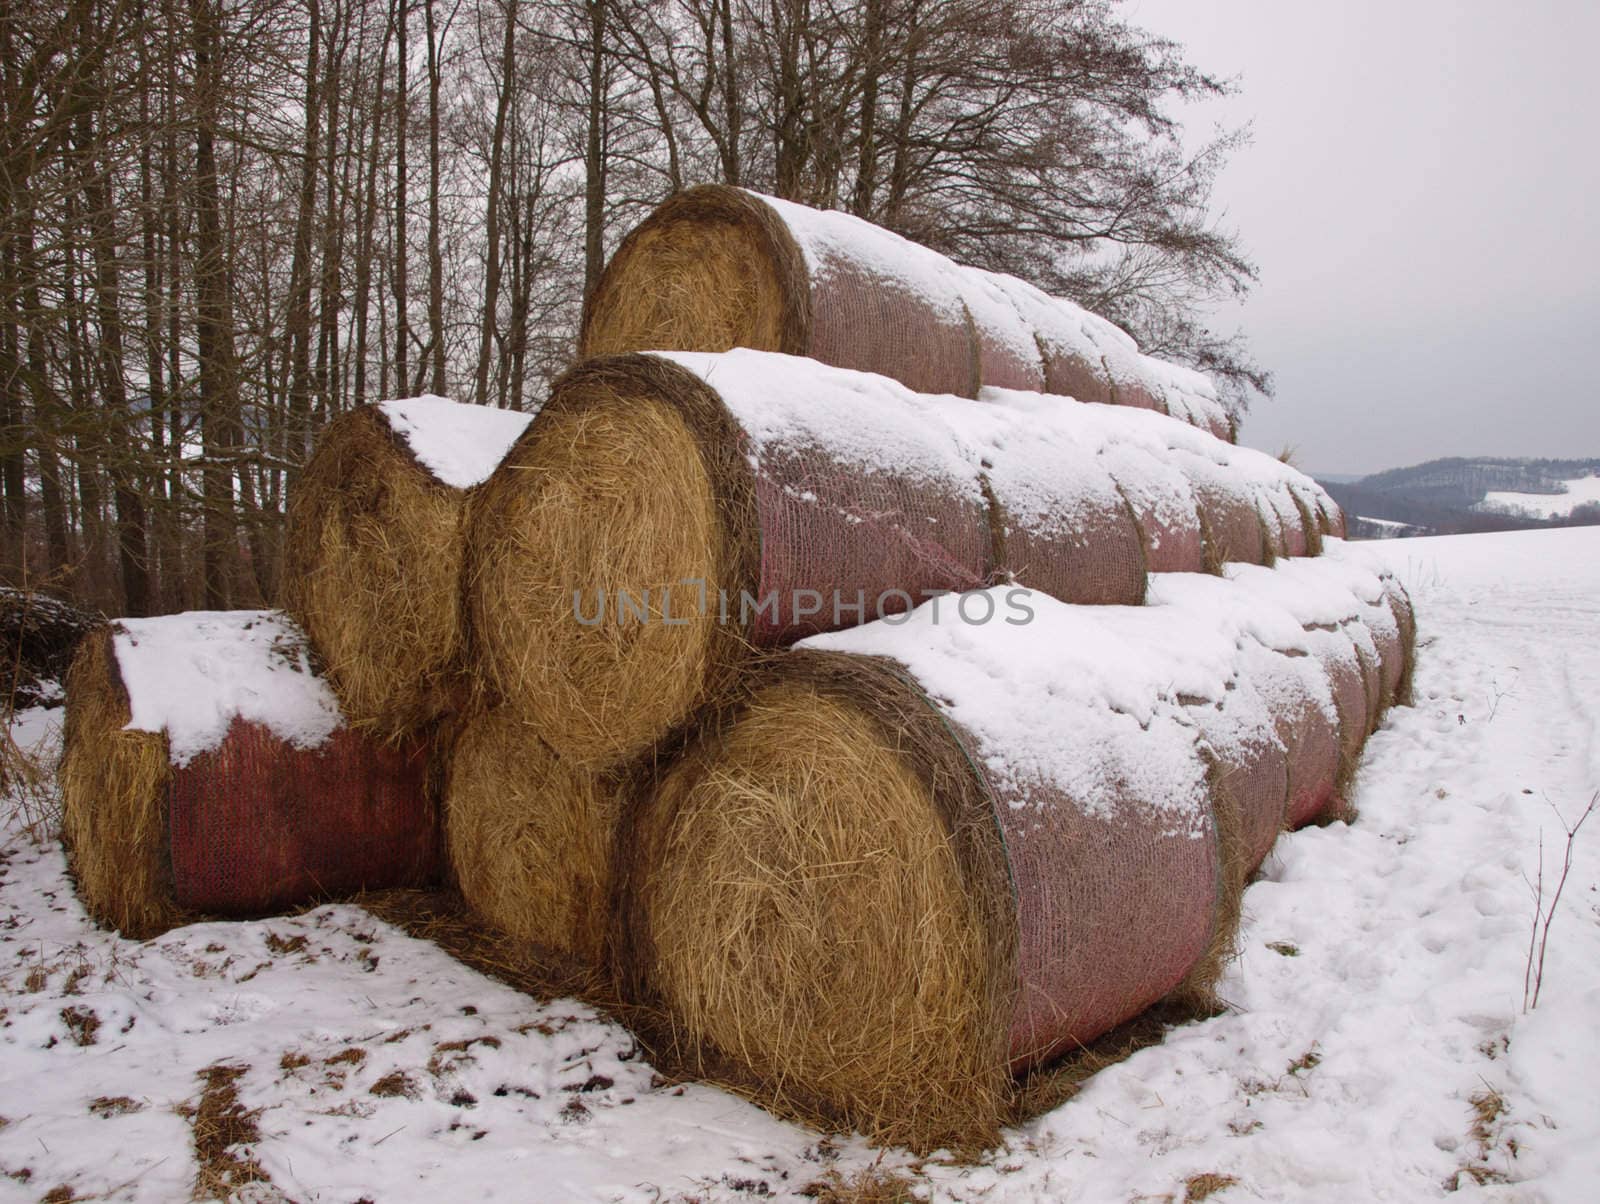 a bale of hay by renales